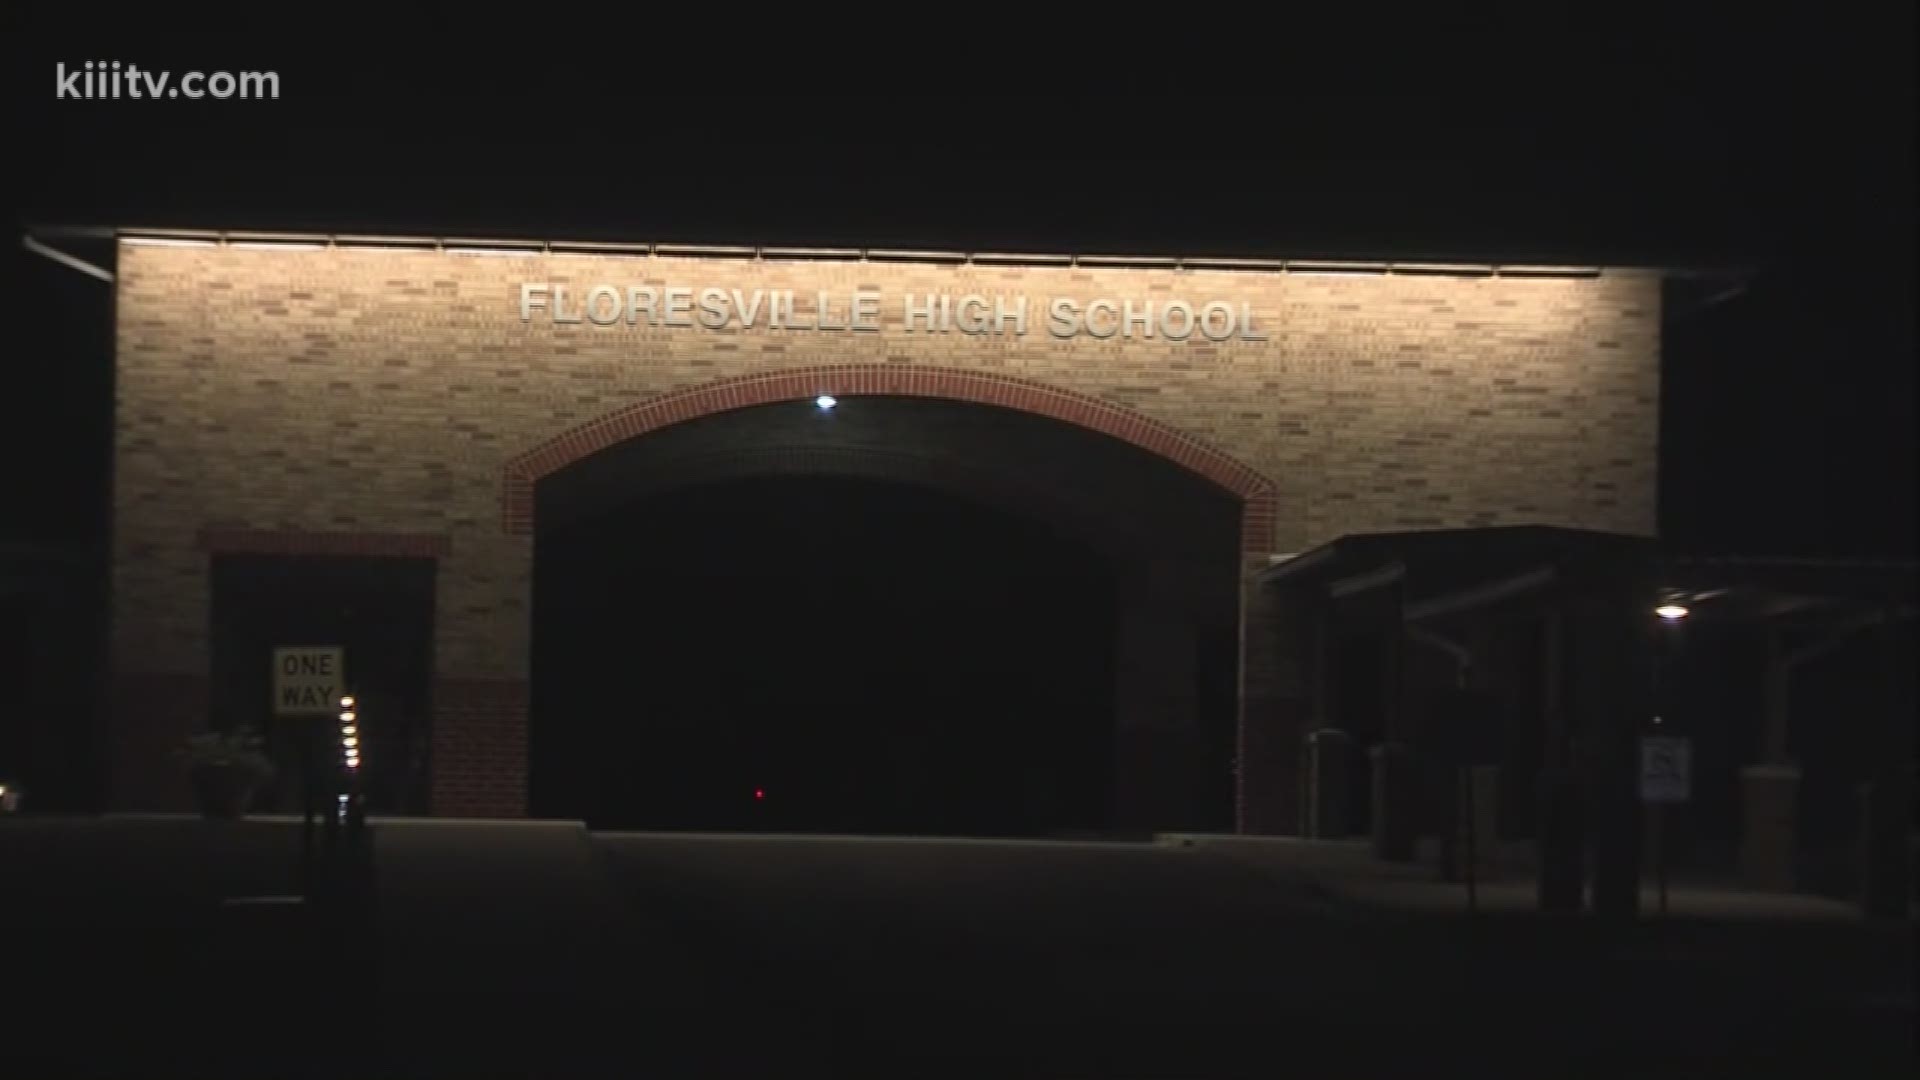 Briana Whitney is live outside Floresville High School as faculty and staff prepare to welcome students after Sunday's shooting.